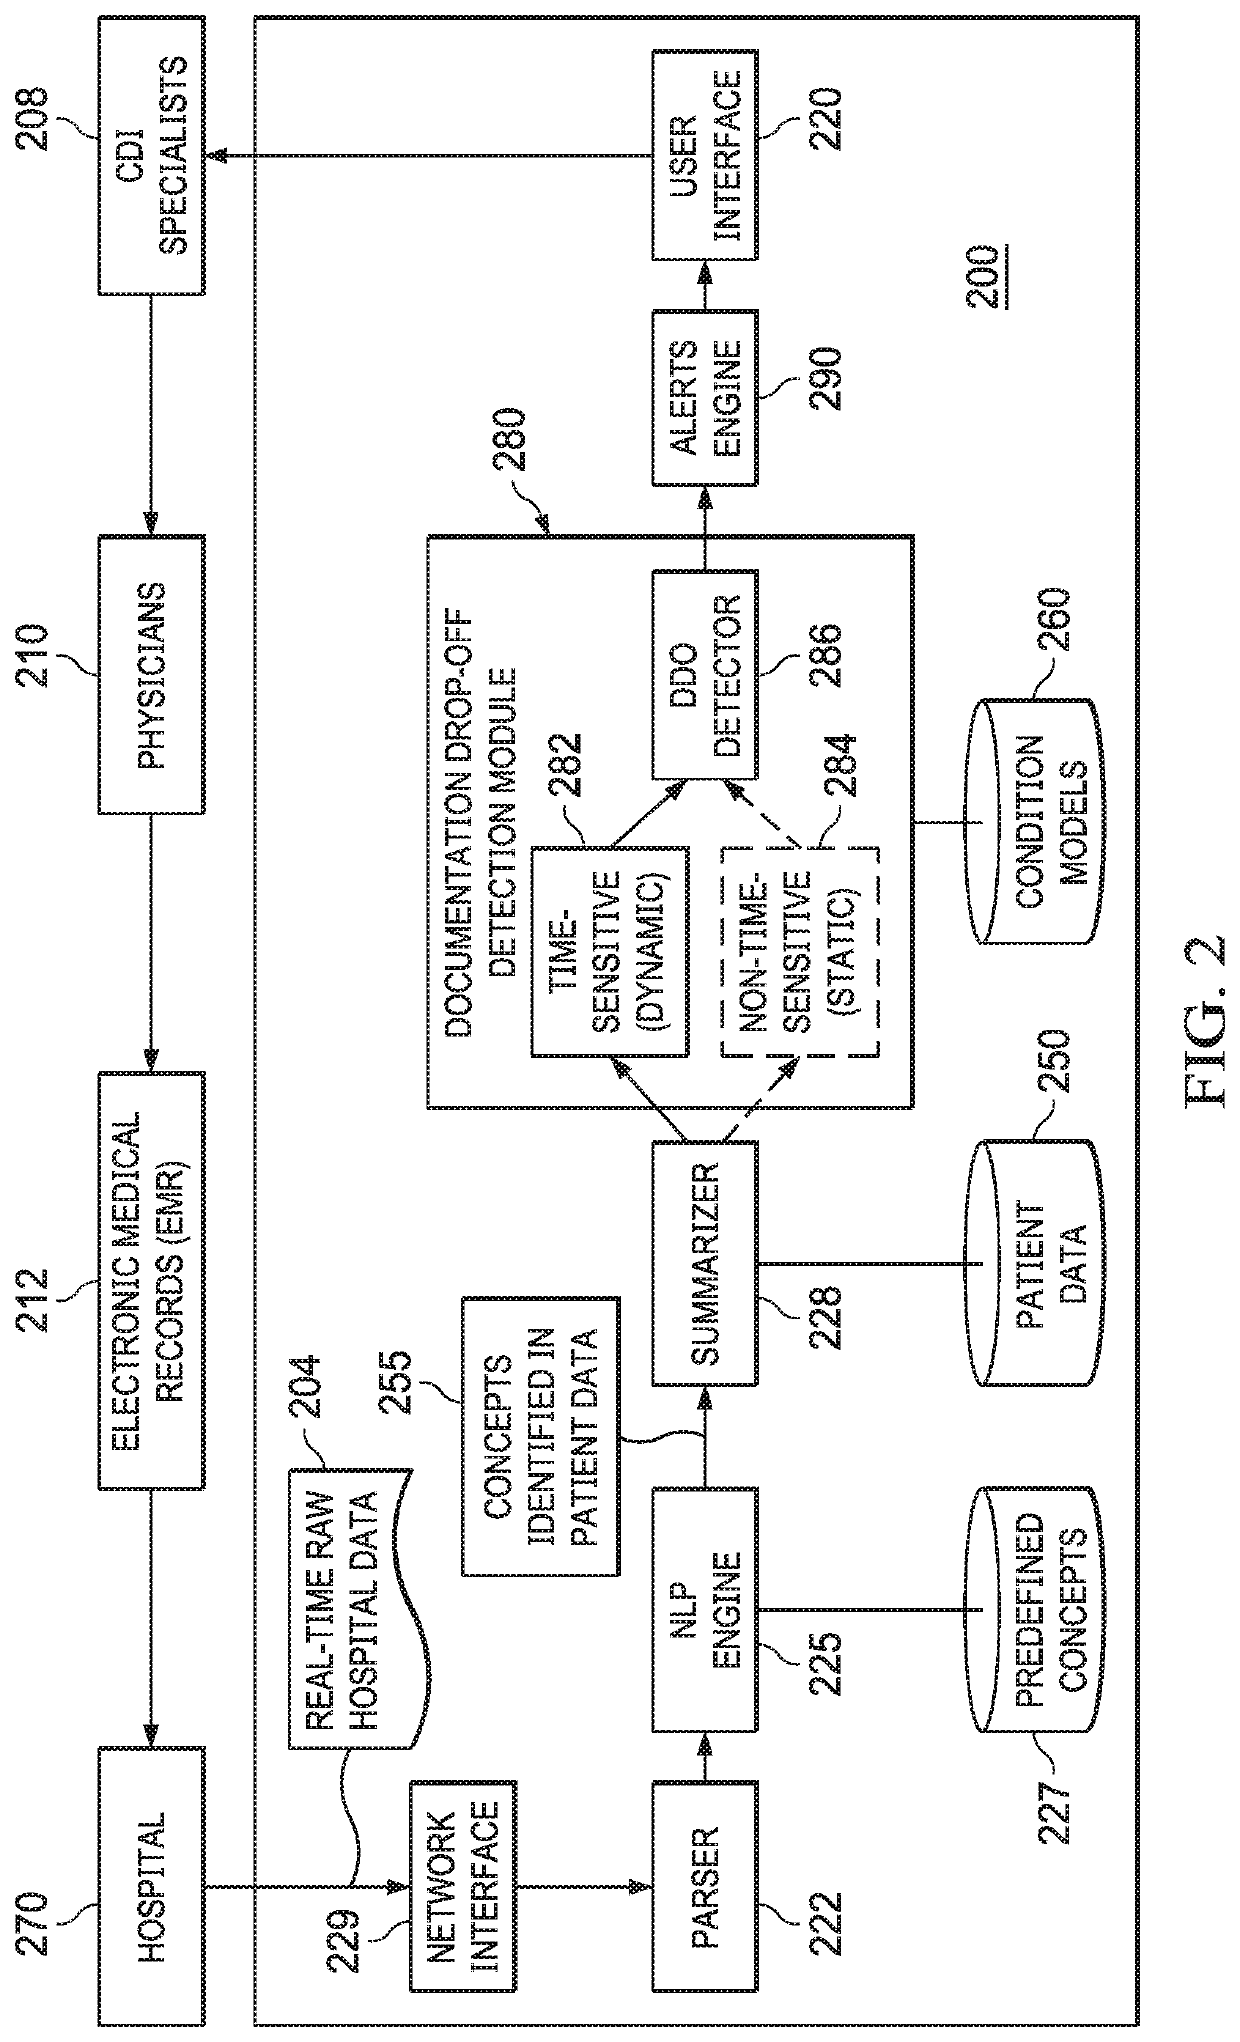 Systems and methods for detecting documentation drop-offs in clinical documentation